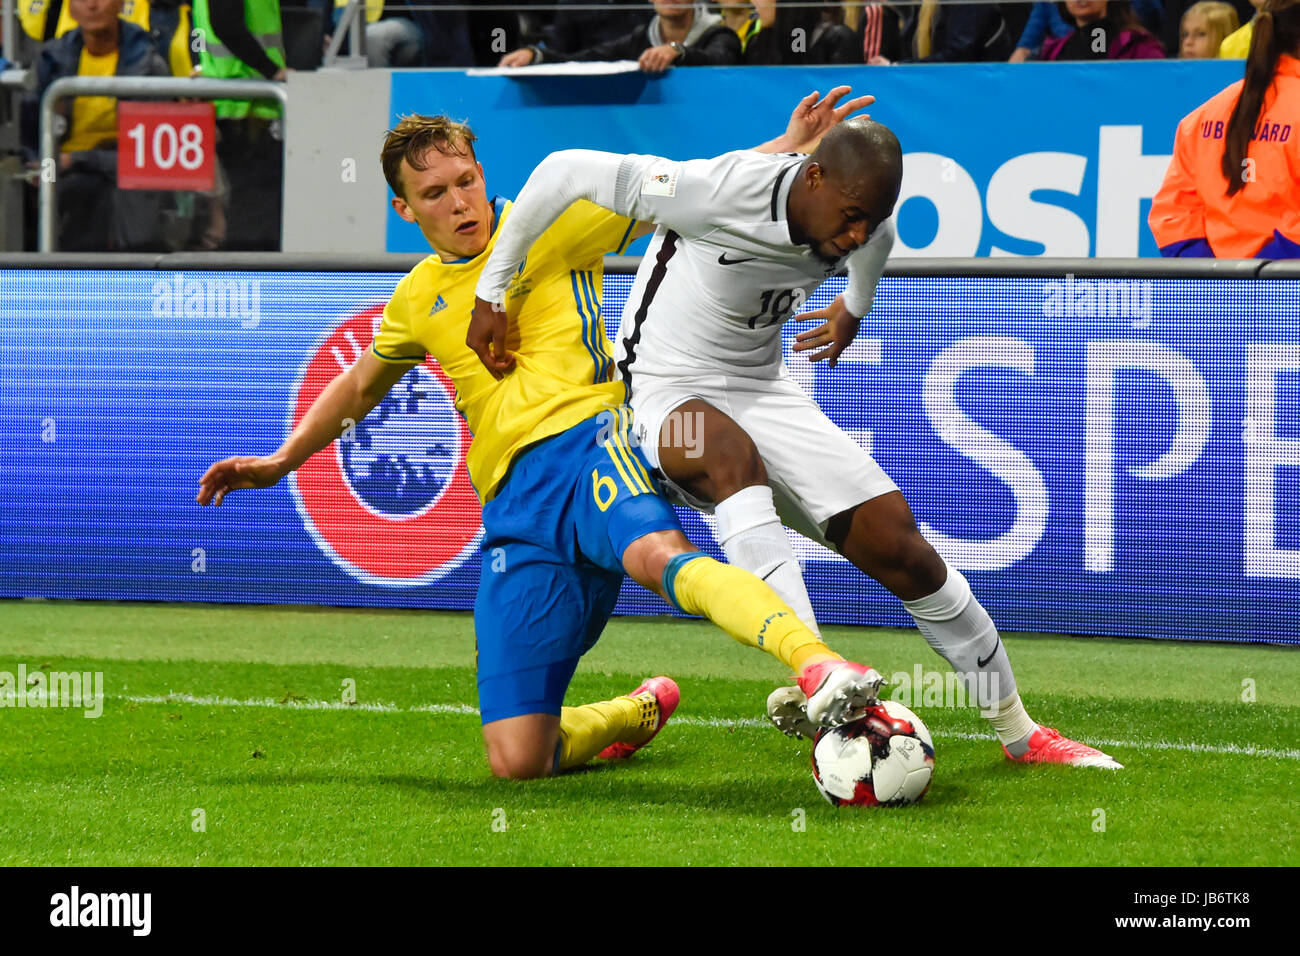 Stockholm, Sweden. 9th June, 2017. Sweden 6 Ludwig Augustinsson and France 19 Djibril Sidibé In battle about the ball in the FIFA World Cup™ Qualifiers game between Sweden and France. Credit: Bror Persson/Frilansfotograferna/Alamy Live News Stock Photo